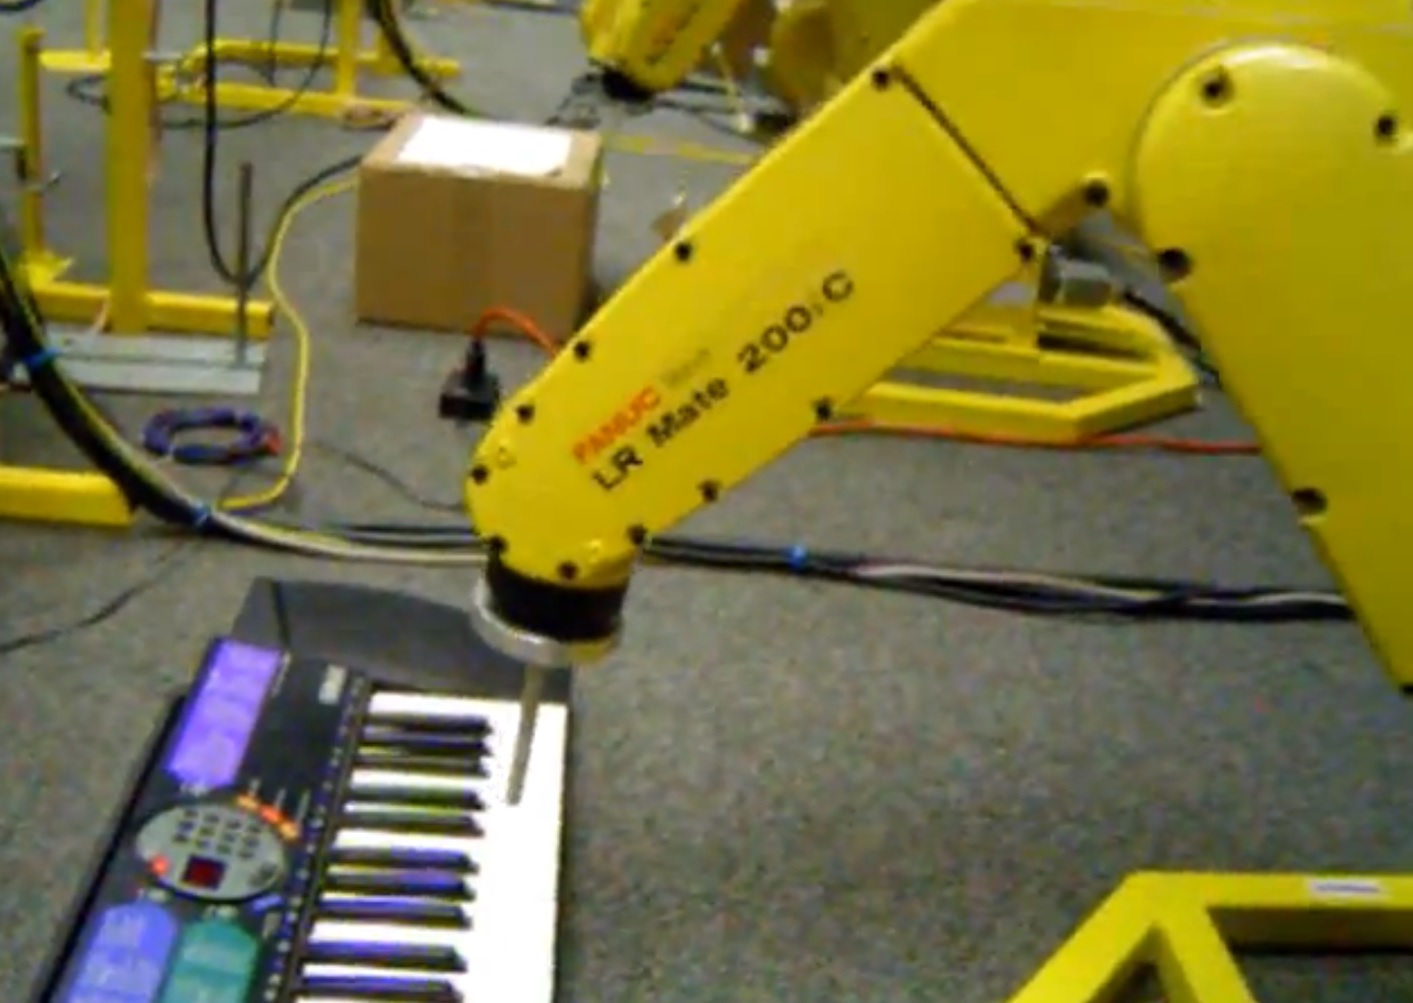 Fanuc LR Mate plays the piano